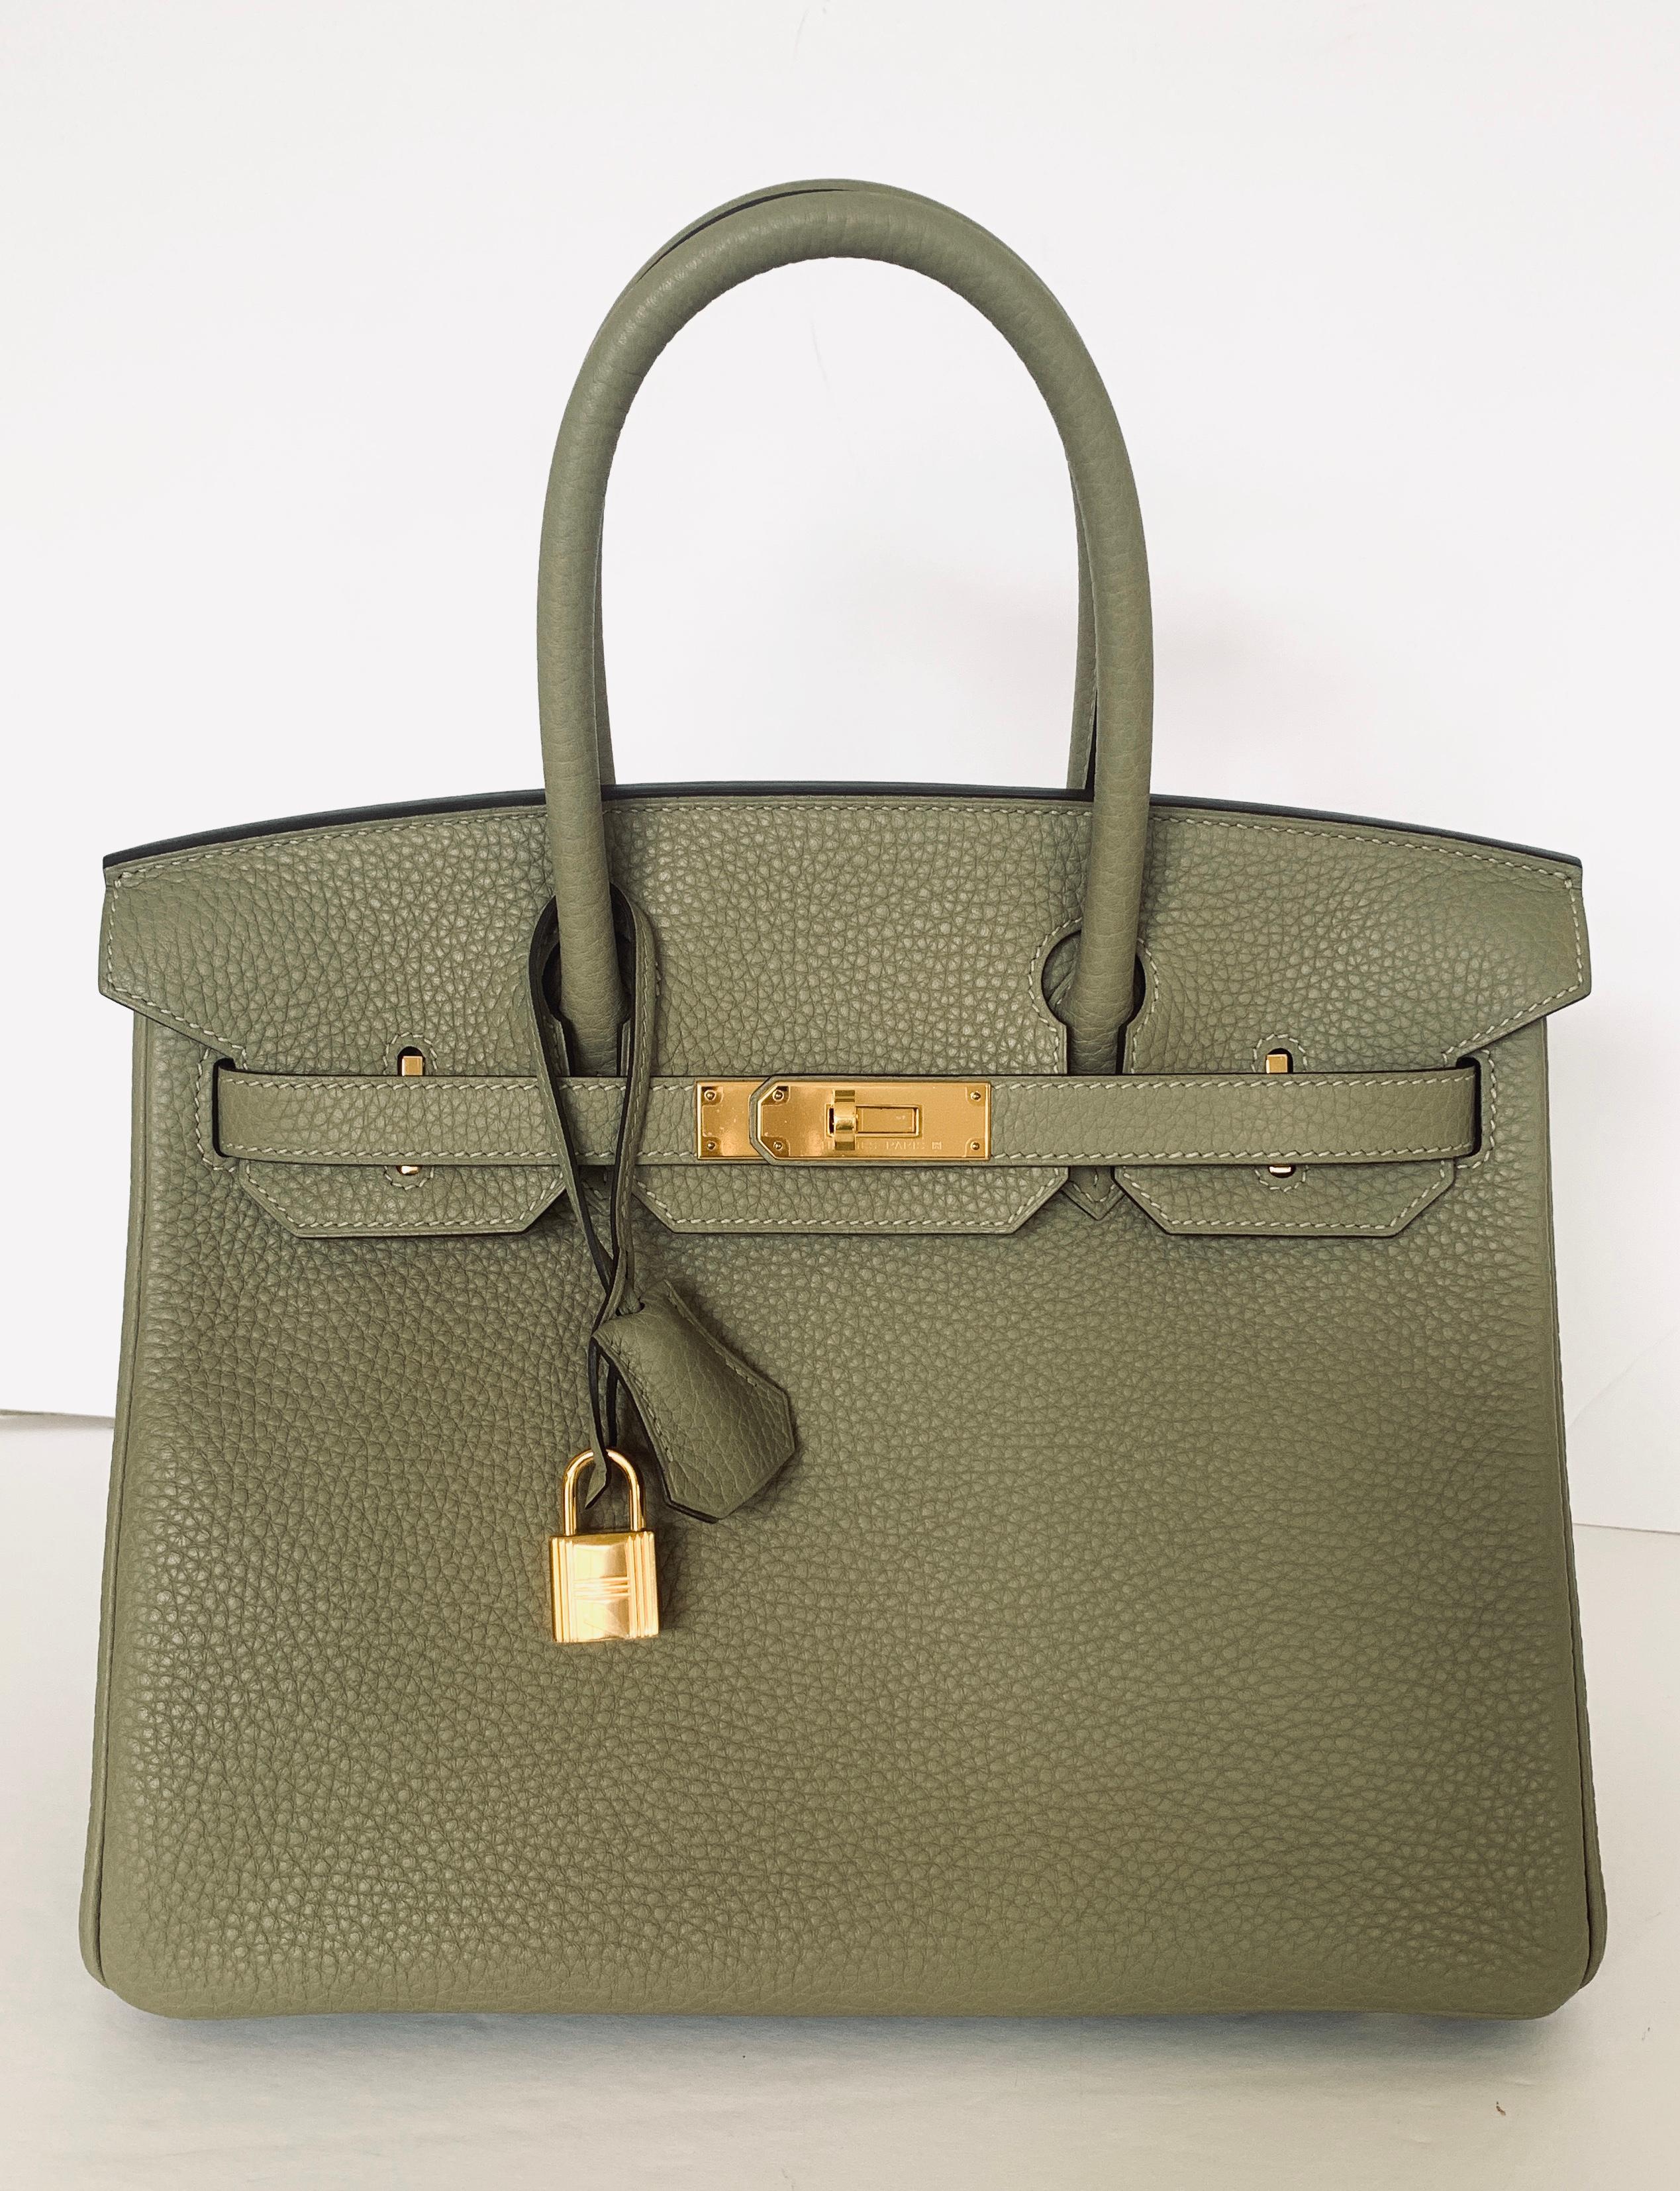 Hermes Birkn 30cm
Color is Sage
A lovely muted neutral
Gold Hardware
Such a pretty color that is unavailable anymore from Hermes
Collection X
Leather Taurillon Clemence
Length 30cm
Tall 21cm/8.5